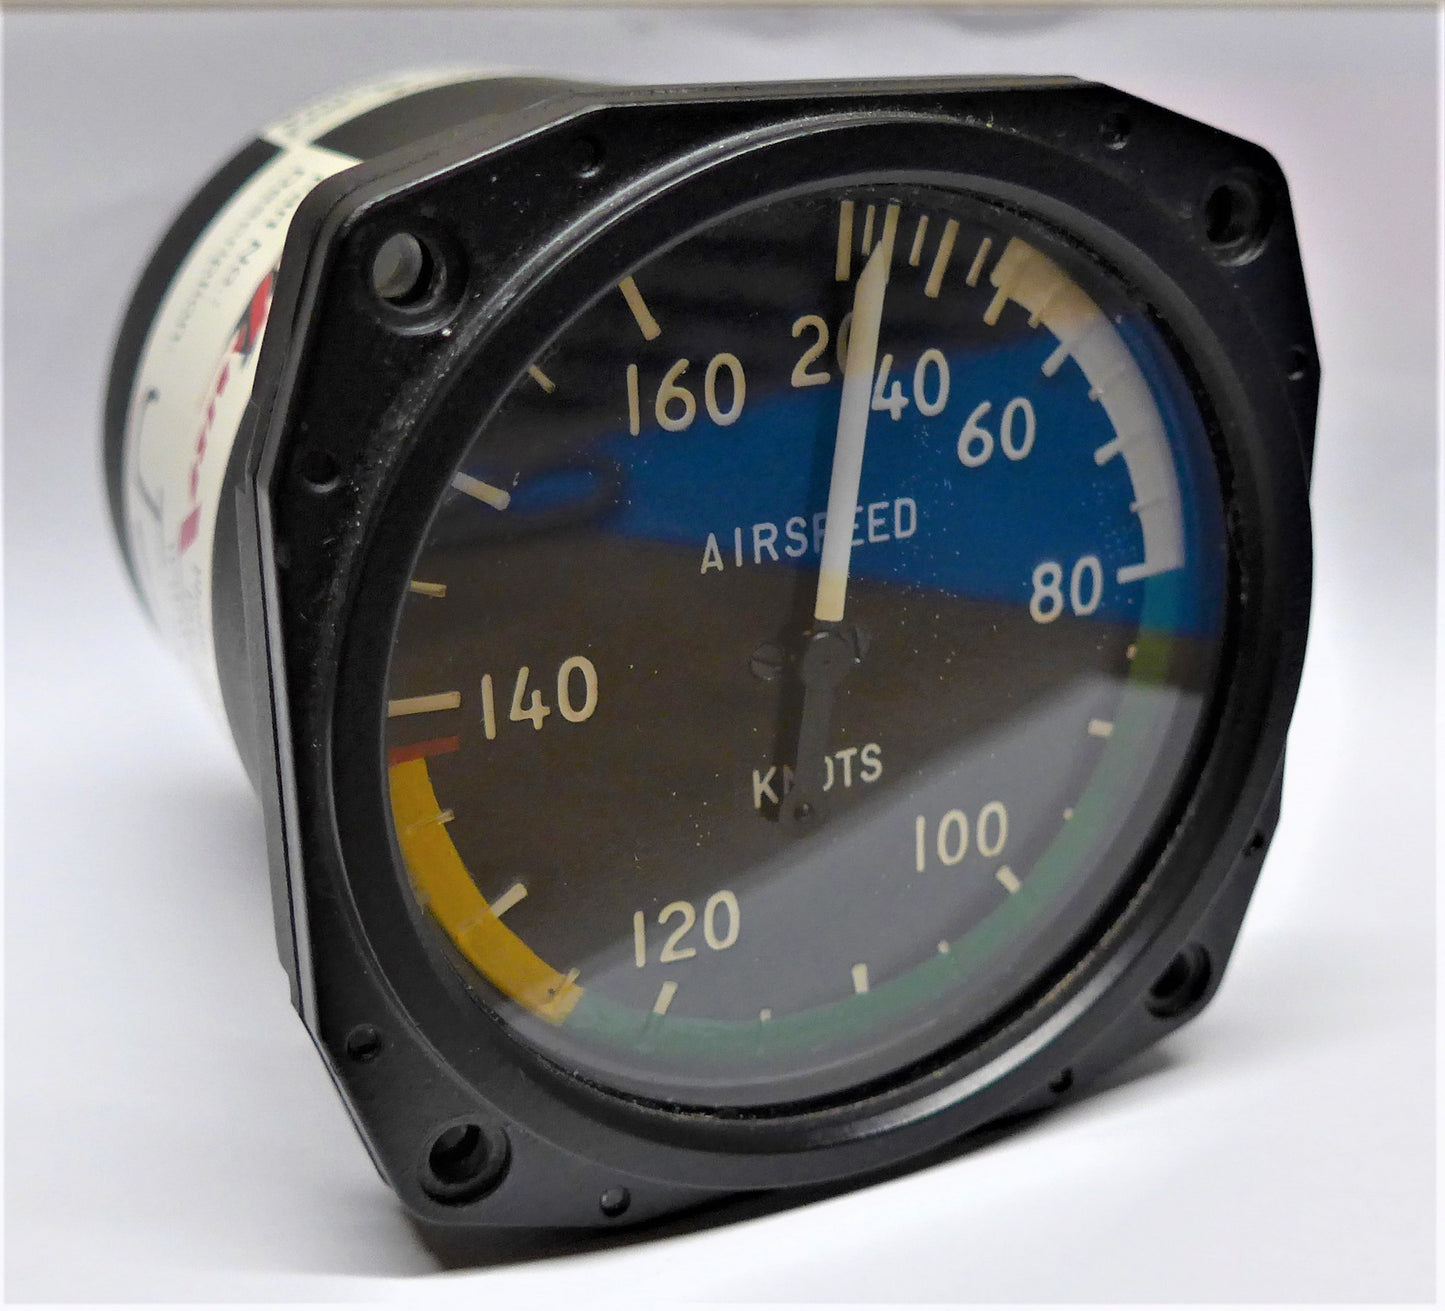 Airspeed Indicator 20-160 Knots - Unserviceable (A/R)